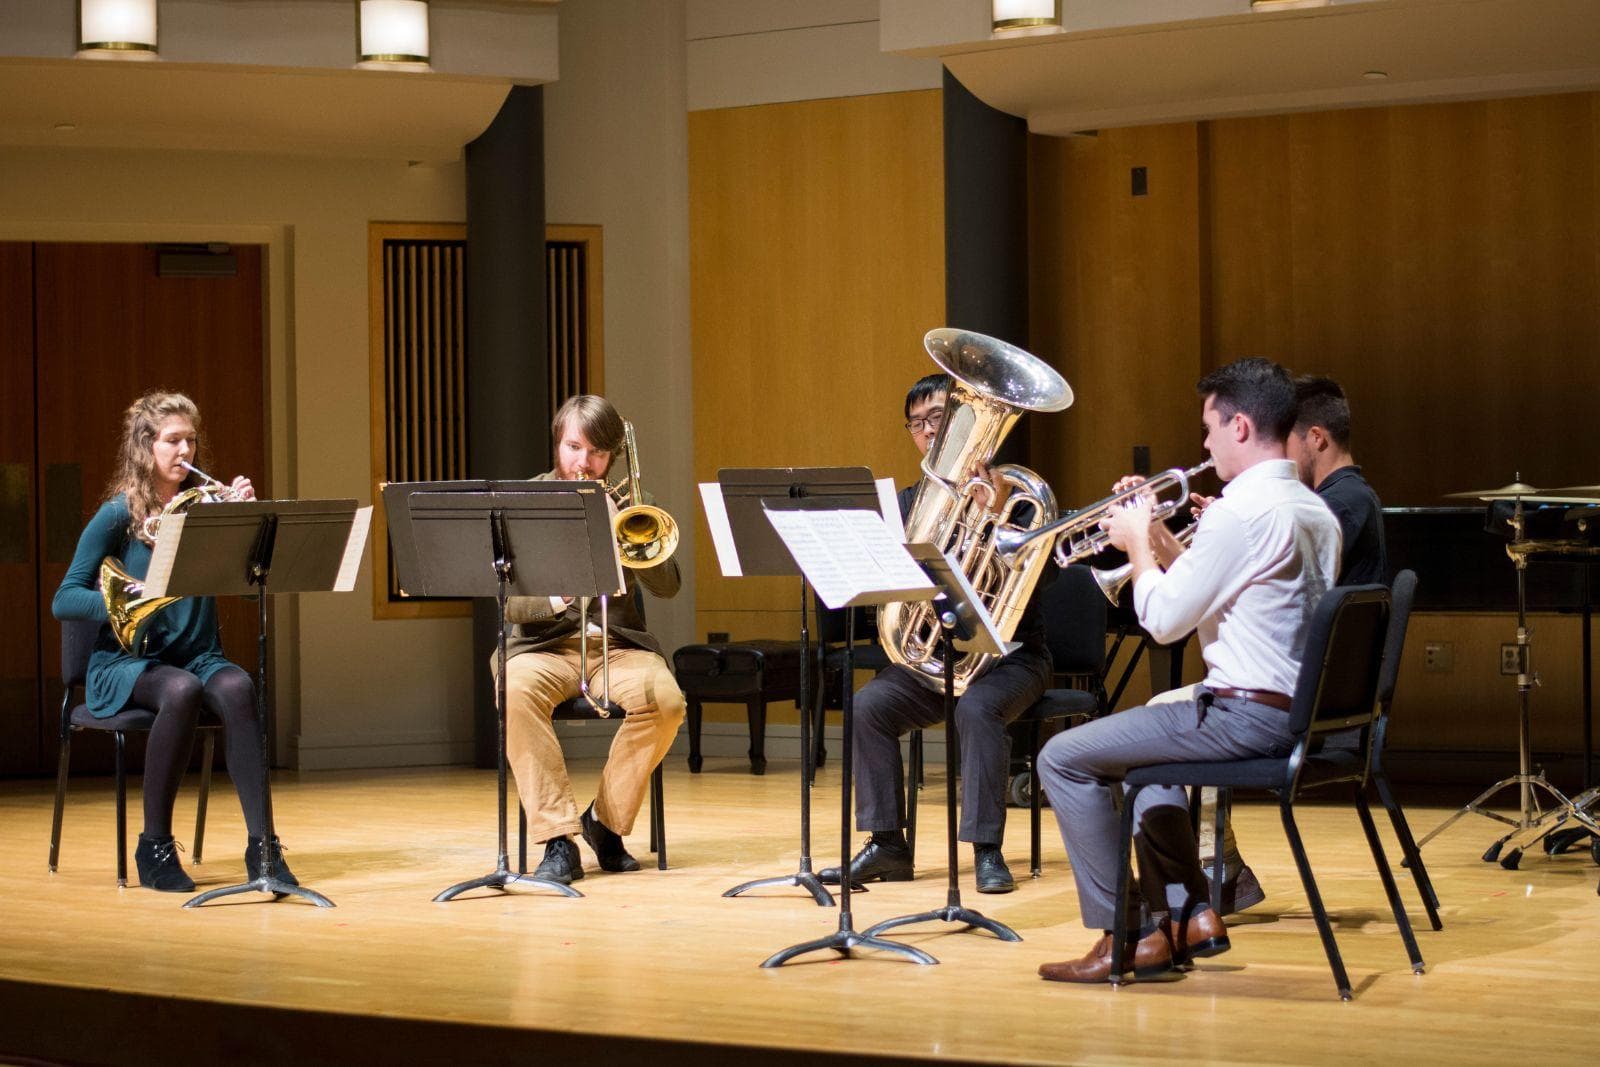 Five musicians sit in a semi-circle as they play brass instruments on stage.